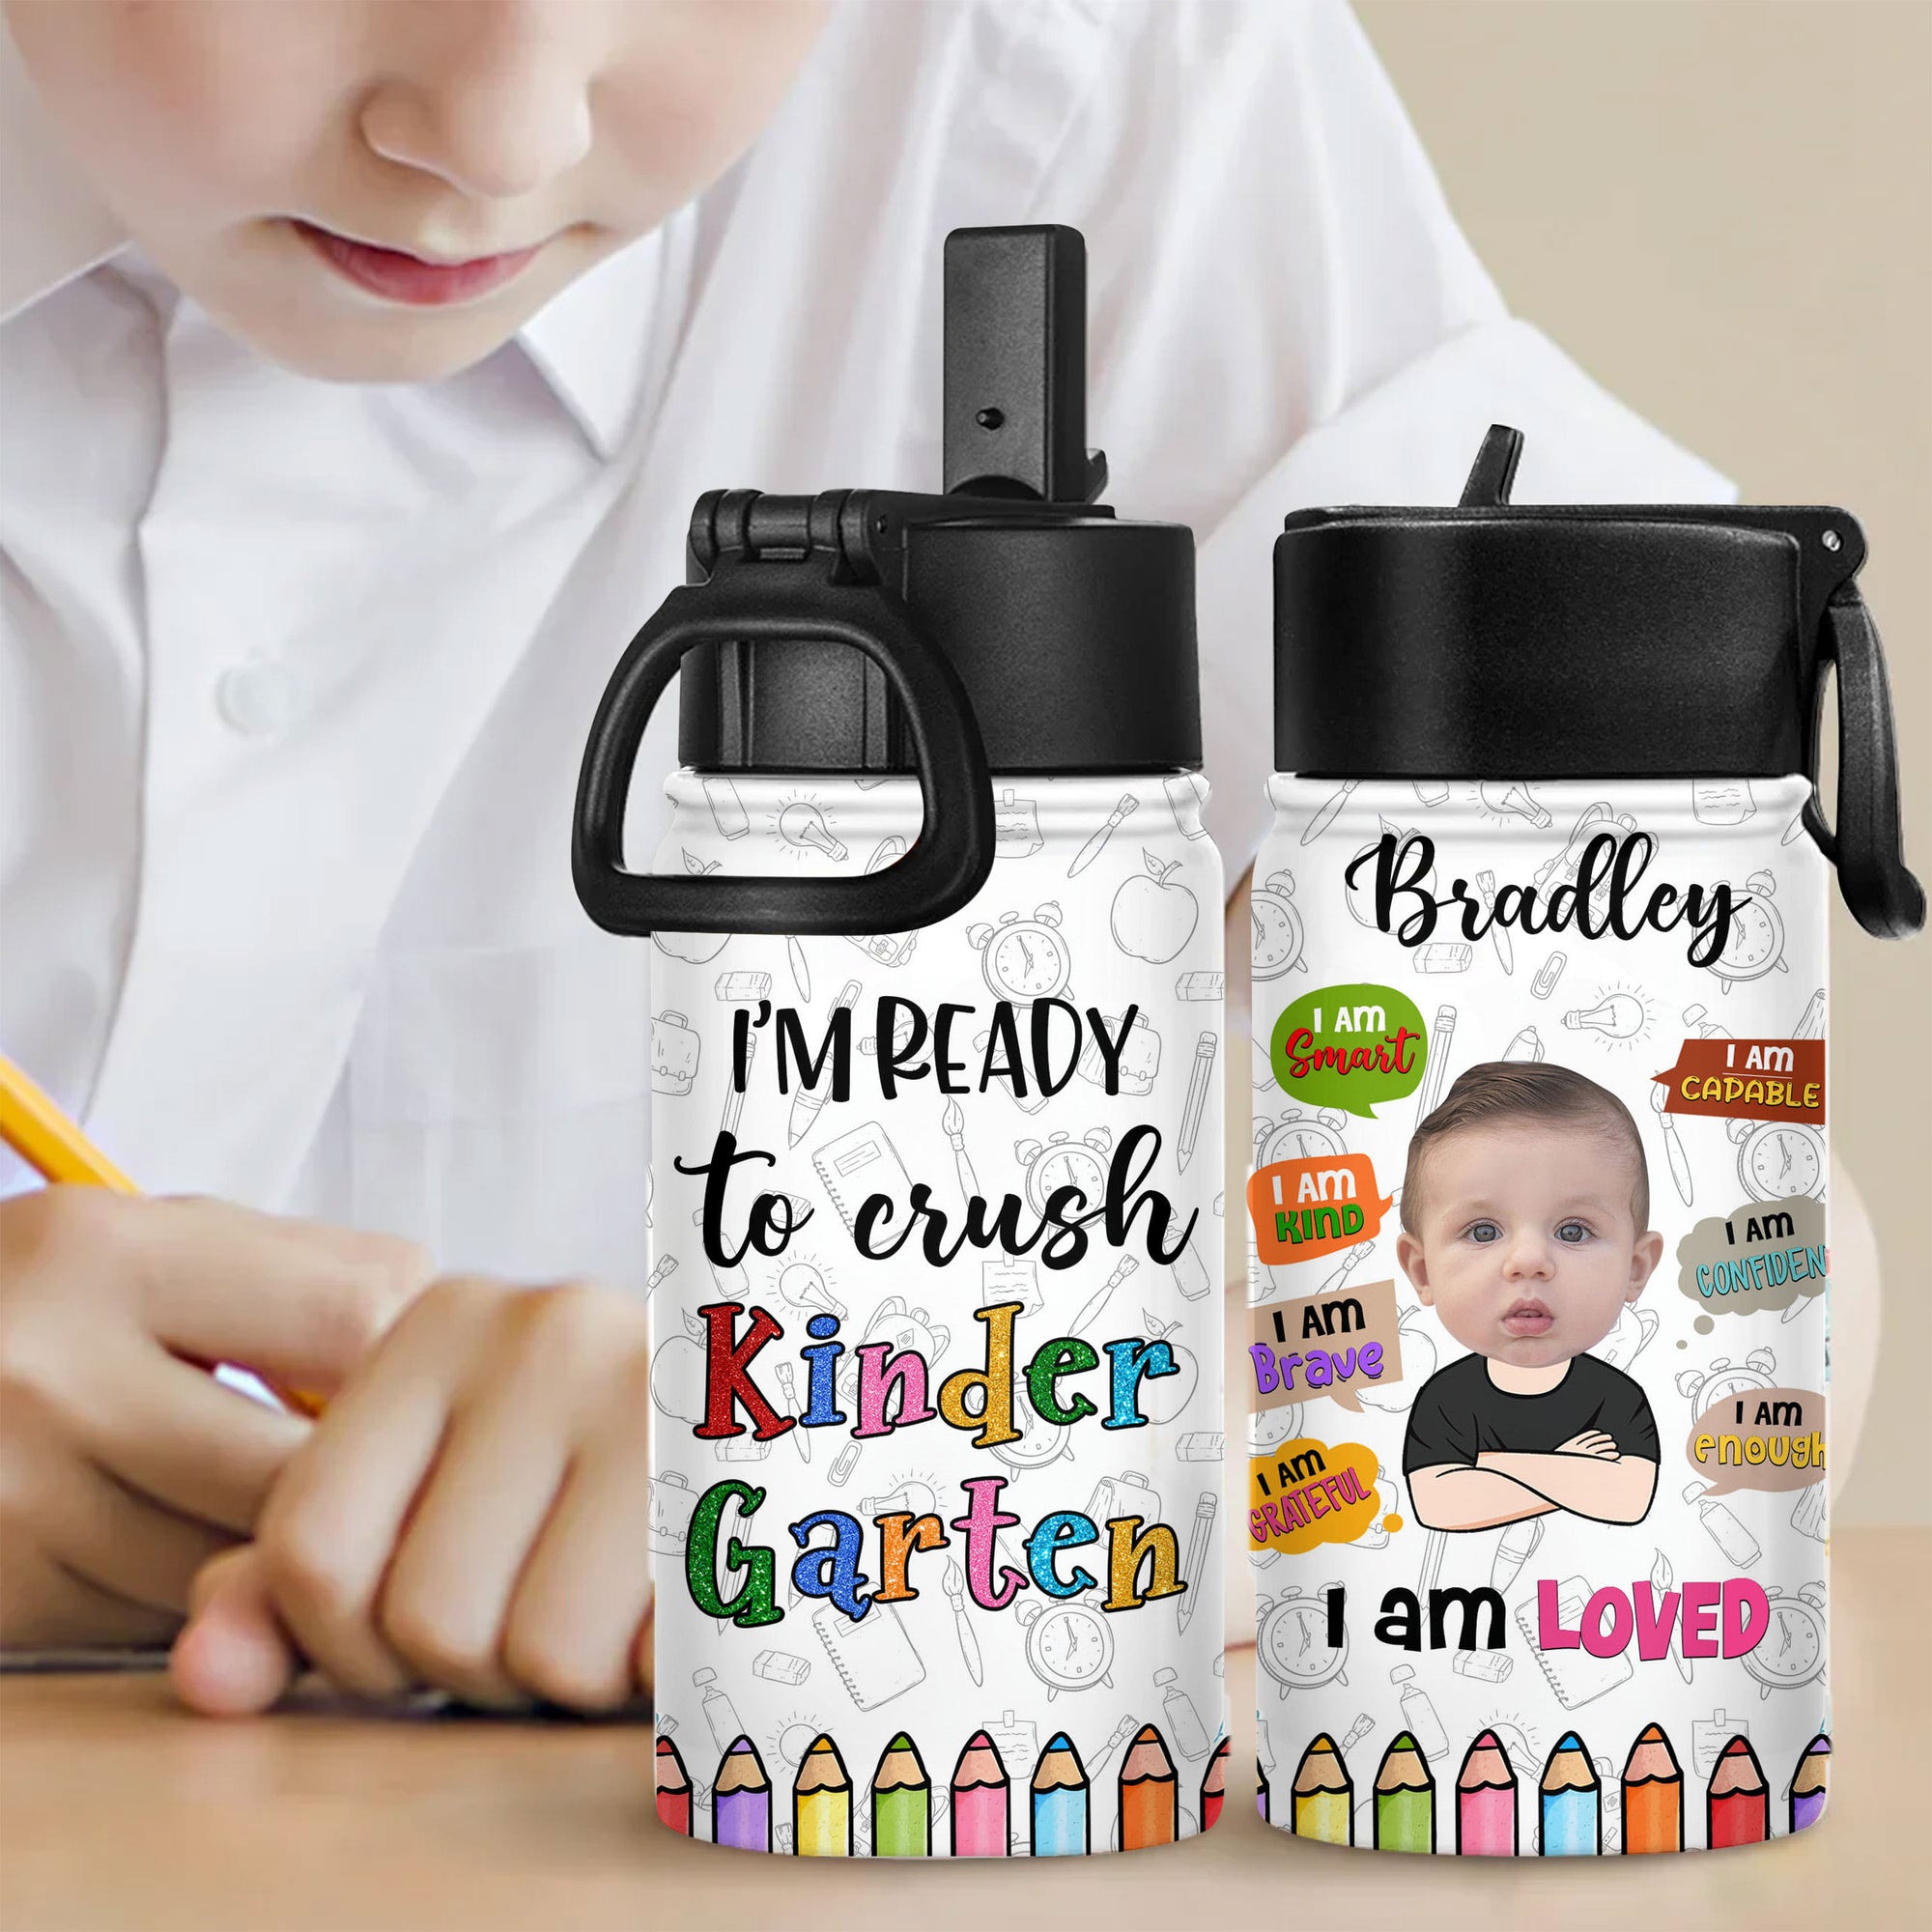 Personalized Water Bottle With Straw Lid - I am Kind Smart Brave Confident Capable Grateful Loved Enough Bottle - Back to School Water Bottle